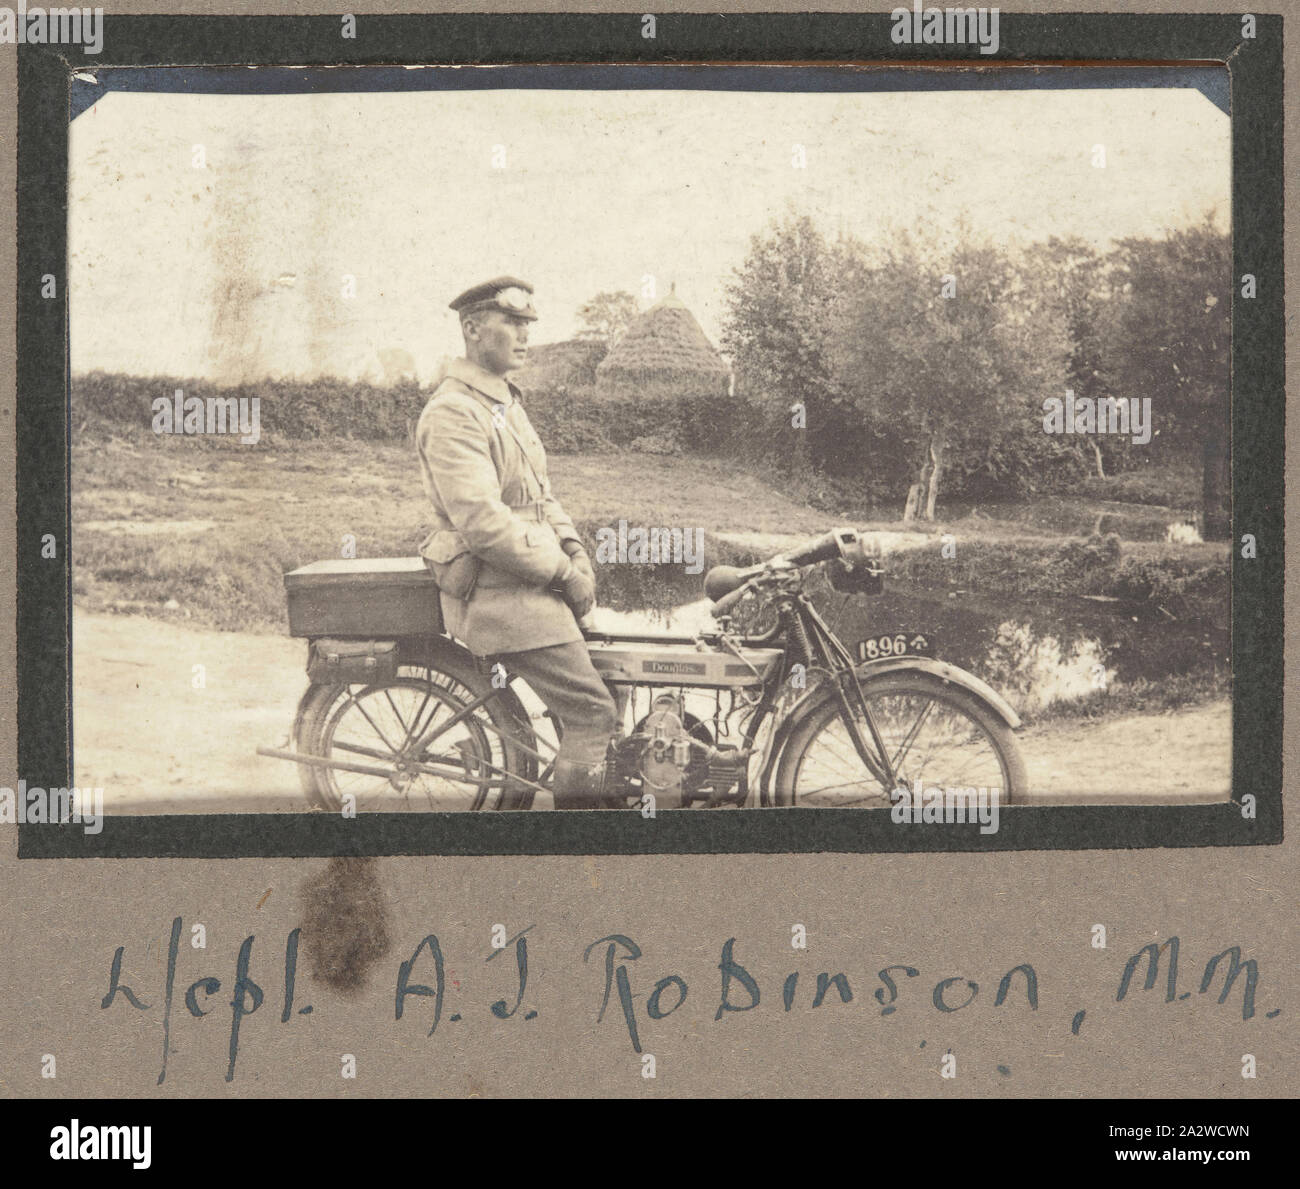 Photograph - 'L/Cpl. A. J. Robinson', France, Sergeant John Lord, World War I, 1916-1917, Black and white photographic print which depicts Lance Corporal Albert Joseph Robinson. Albert Joseph Robinson enlisted in the Australian army on the 20th of August 1914 at 24 years of age. He was initially deployed to Gallipoli in August 1915 but was soon transferred to the 13th Field Ambulance in February 1916 and disembarked at Marseilles in June of the same year Stock Photo